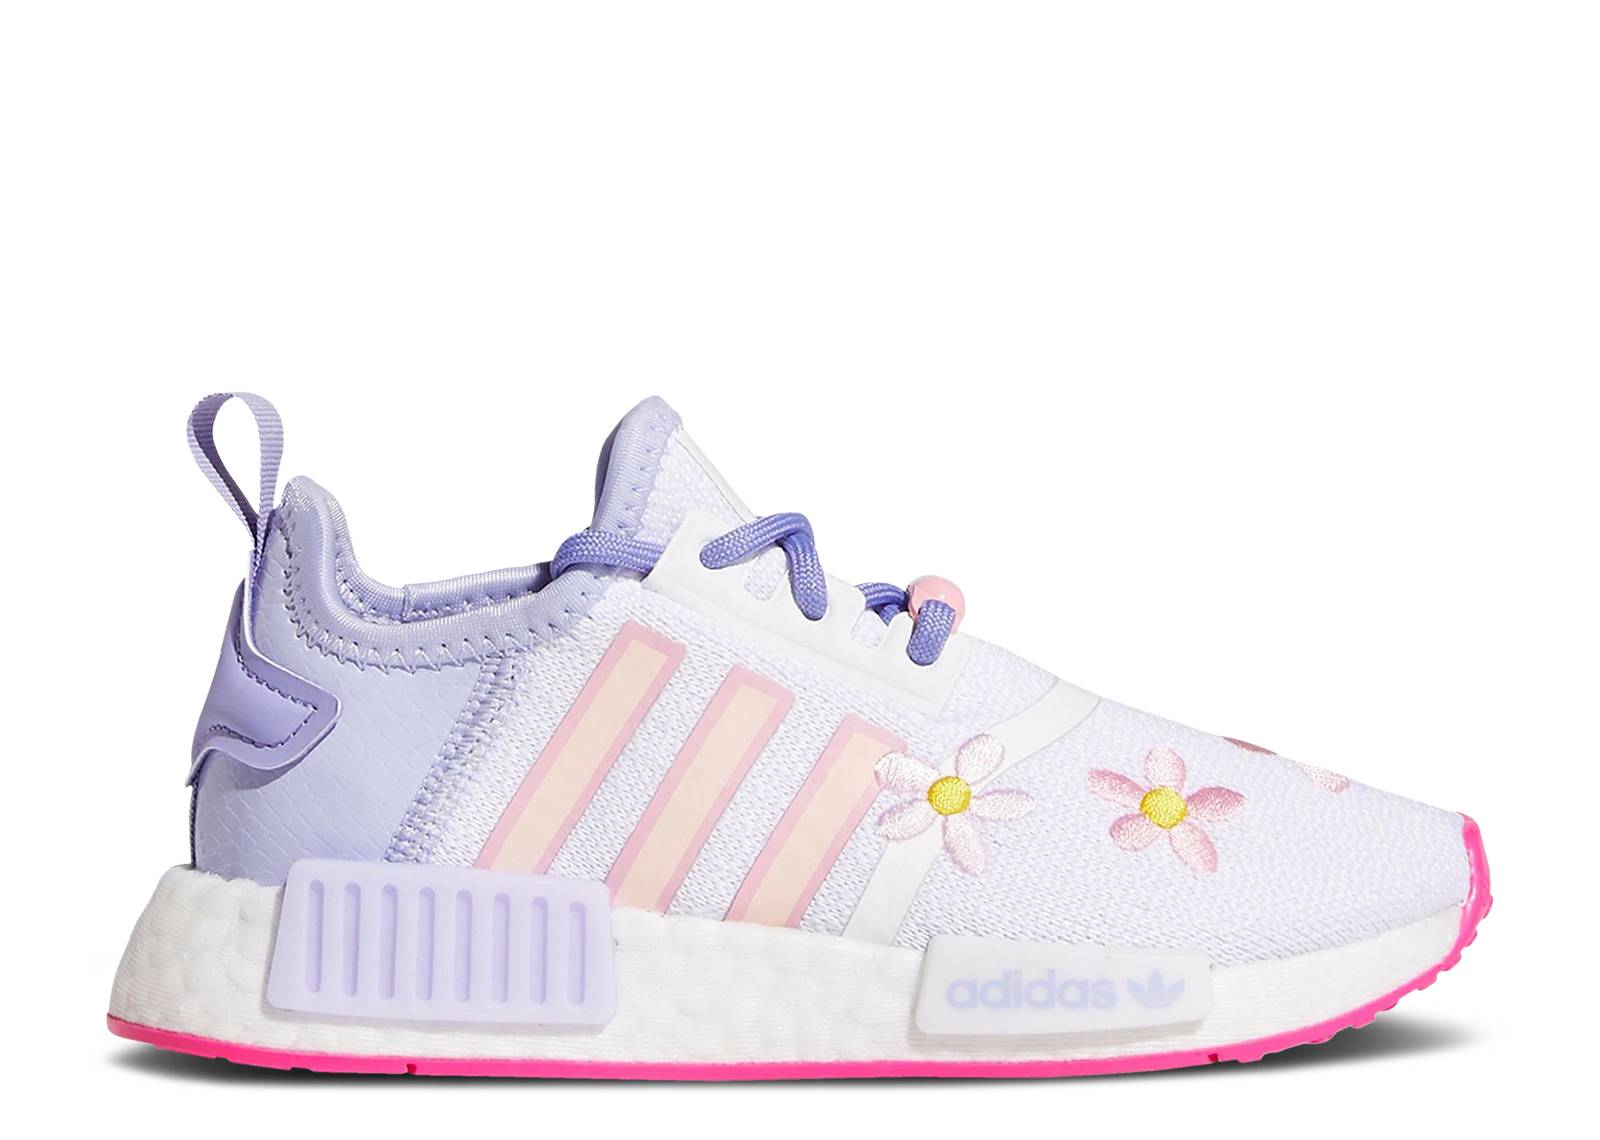 Monsters Inc. x NMD_R1 Little Kid 'Boo'